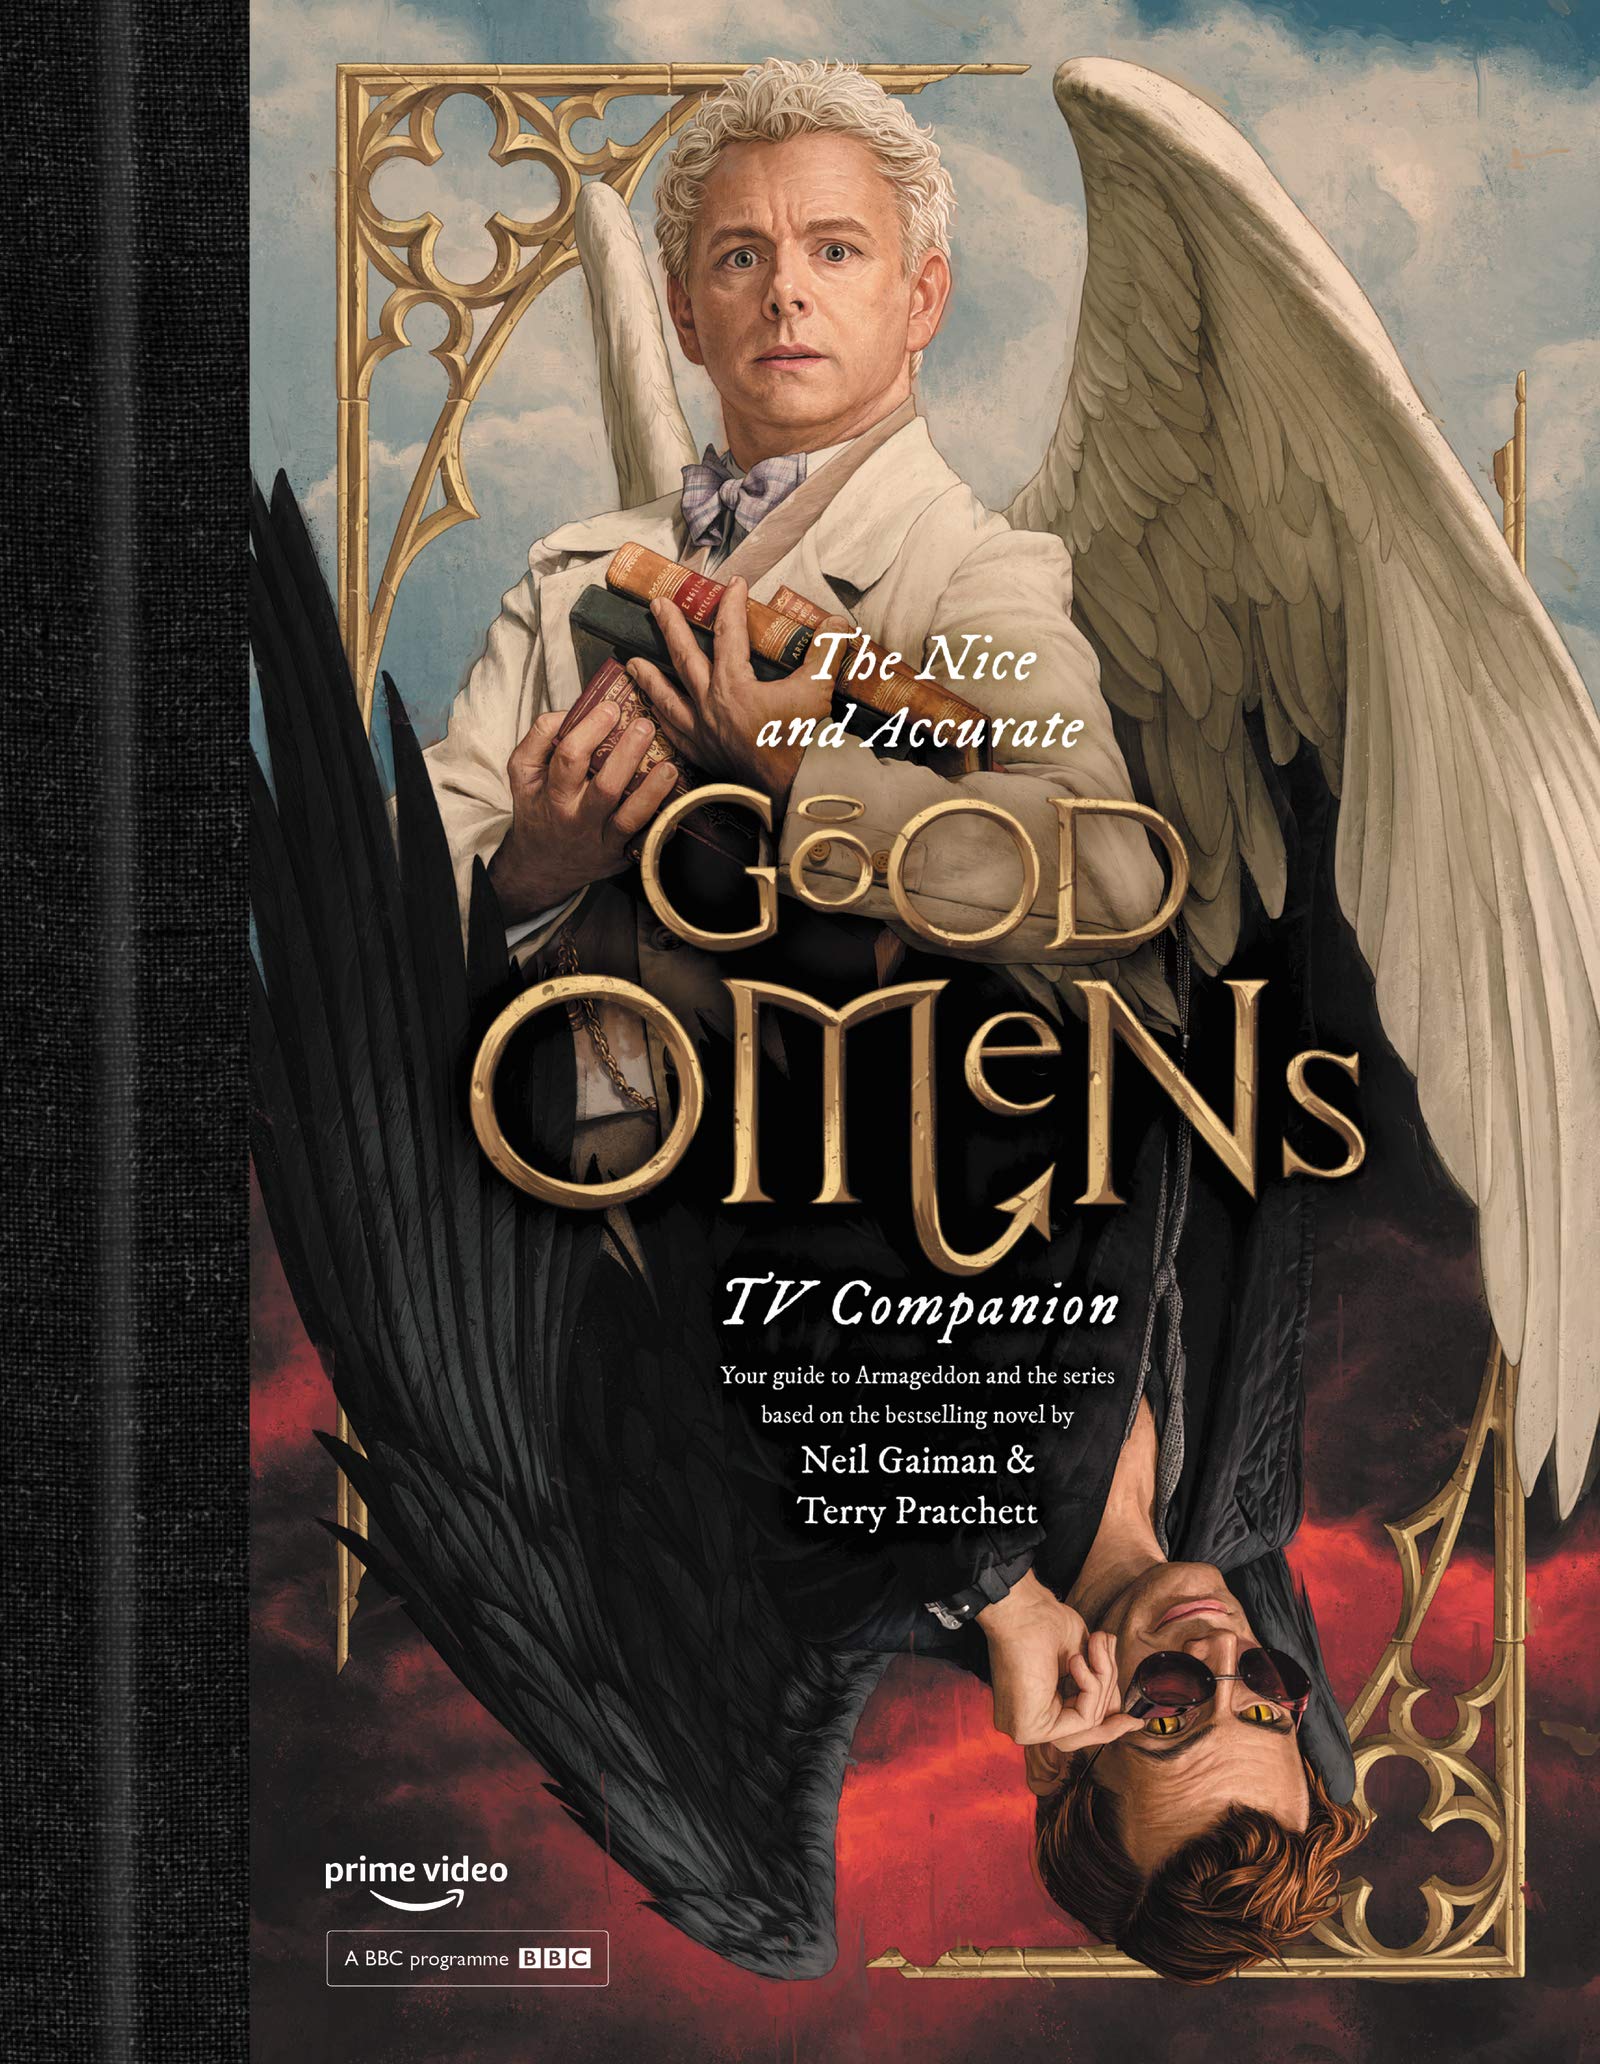 The Nice and Accurate Good Omens TV Companion: Your Guide to Armageddon and the Series Based on the Bestselling Novel by Terry Pratchett and Neil Gaim (Hardcover)